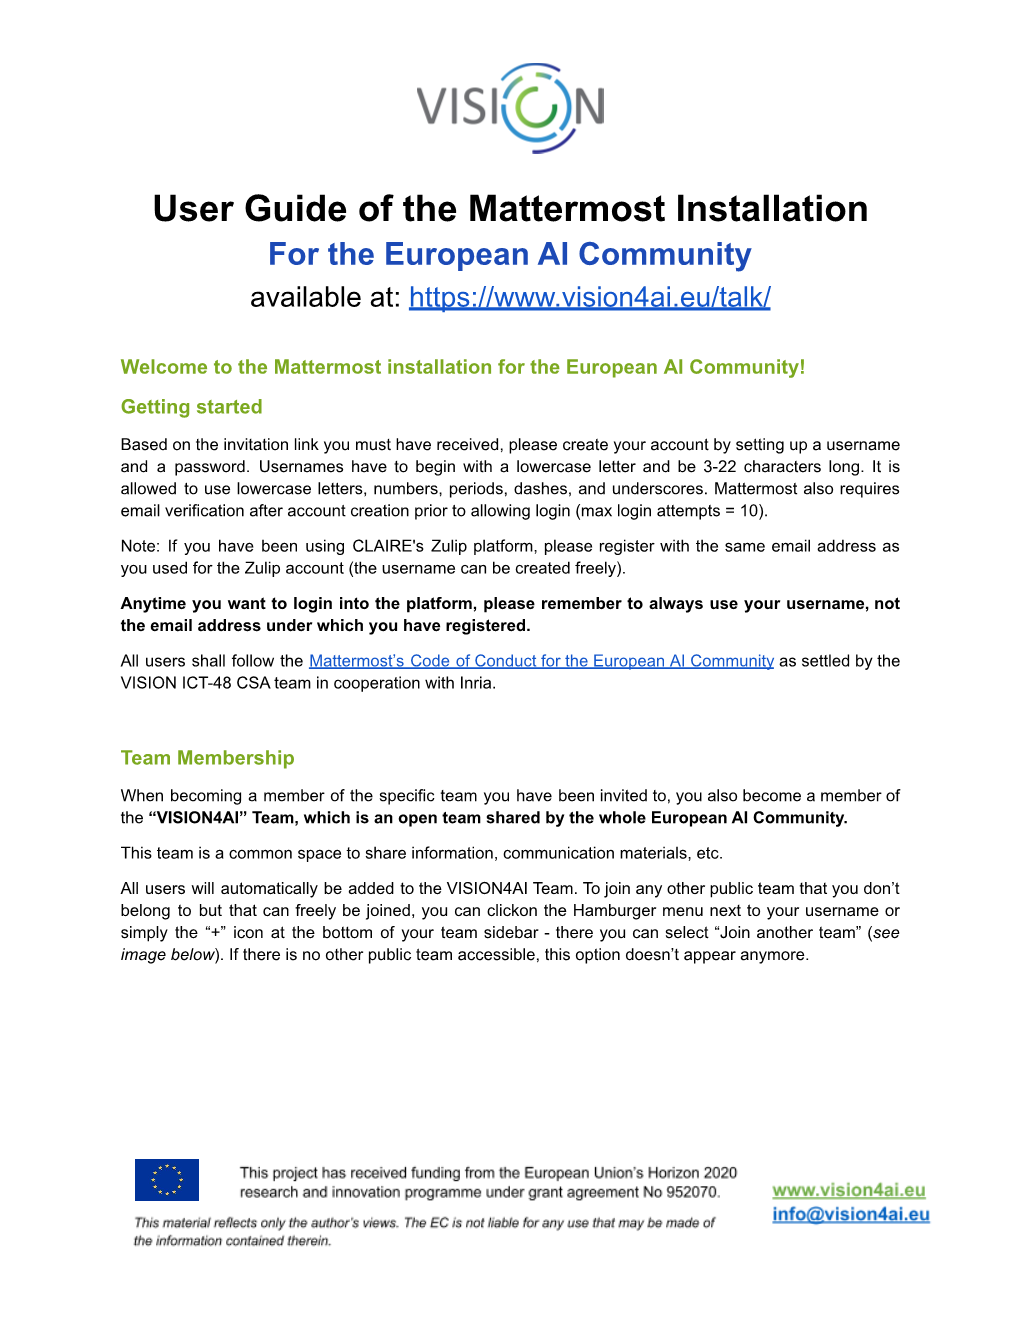 User Guide of the Mattermost Installation for the European AI Community Available At